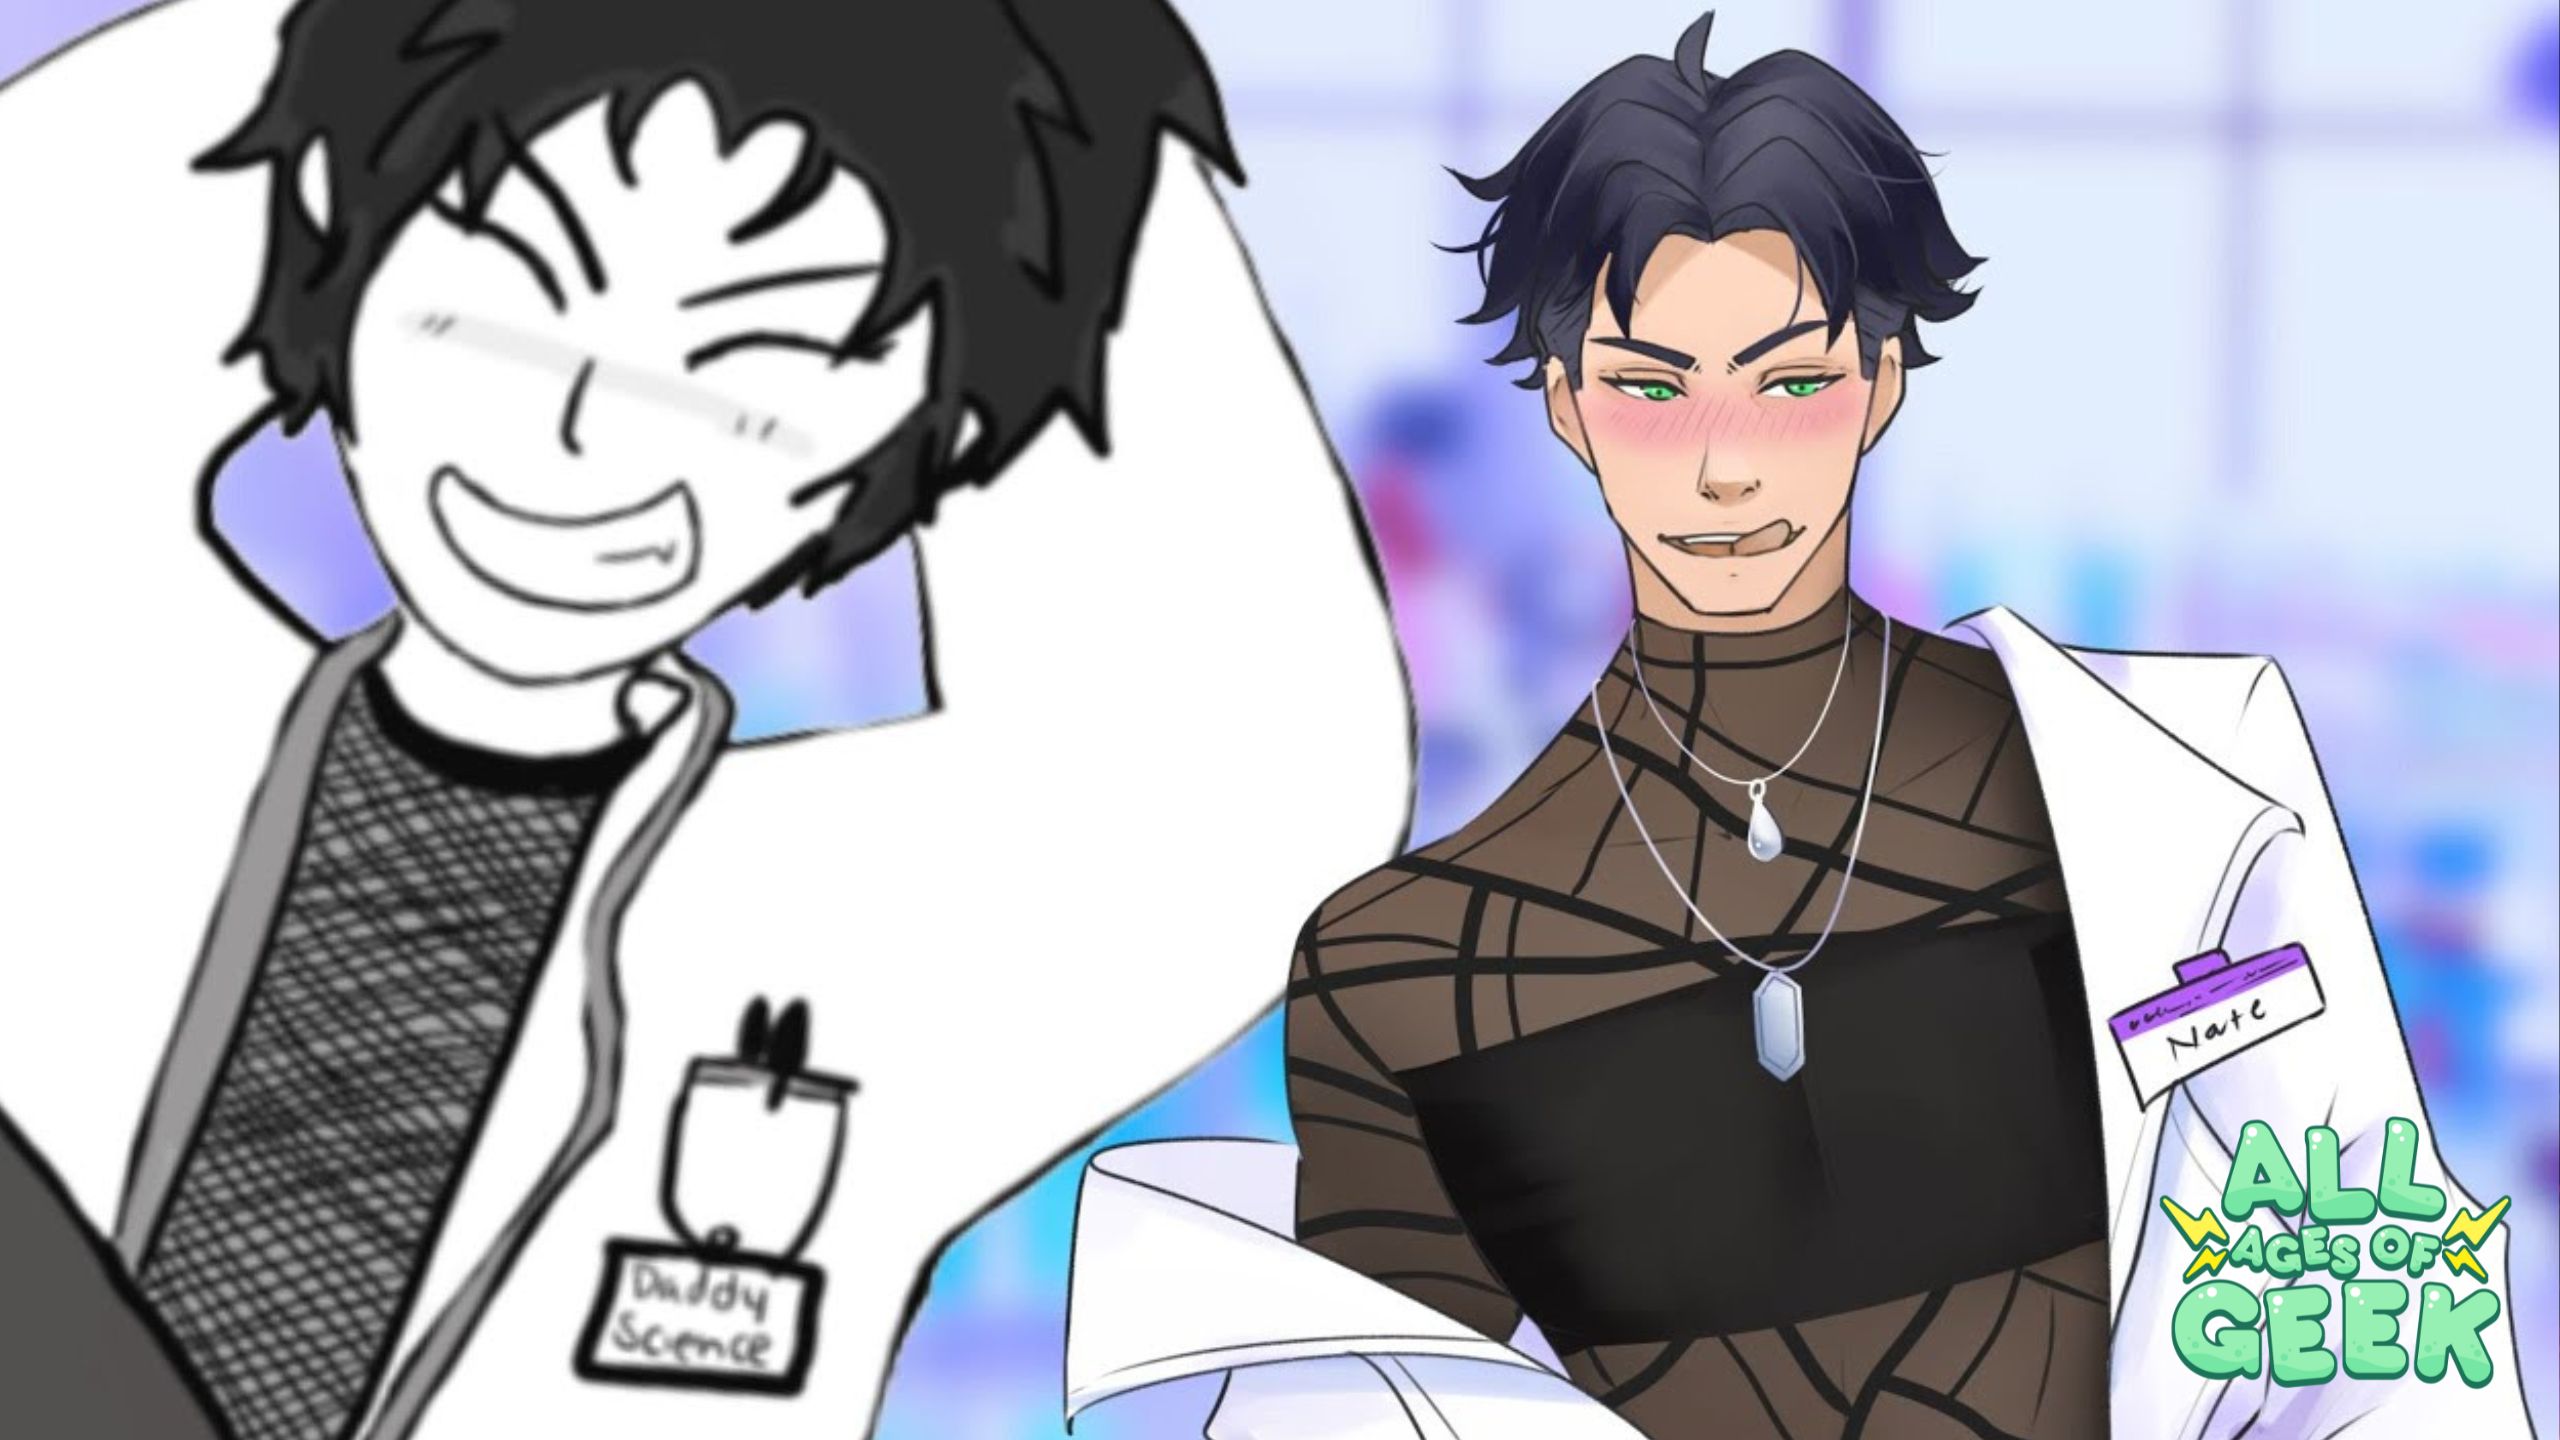 The image features Nate from "I Married a Monster on a Hill." On the left, there is a black-and-white drawing of Nate with a cheerful expression, labeled "Daddy Science" on his name tag. On the right, the colored version of Nate stands with a slight blush, wearing a stylish mesh top with geometric patterns and multiple necklaces. He has his lab coat draped over his shoulders, displaying a name tag with "Nate" written on it. The background is a softly blurred indoor setting with cool tones. The All Ages of Geek logo is displayed in the bottom right corner.